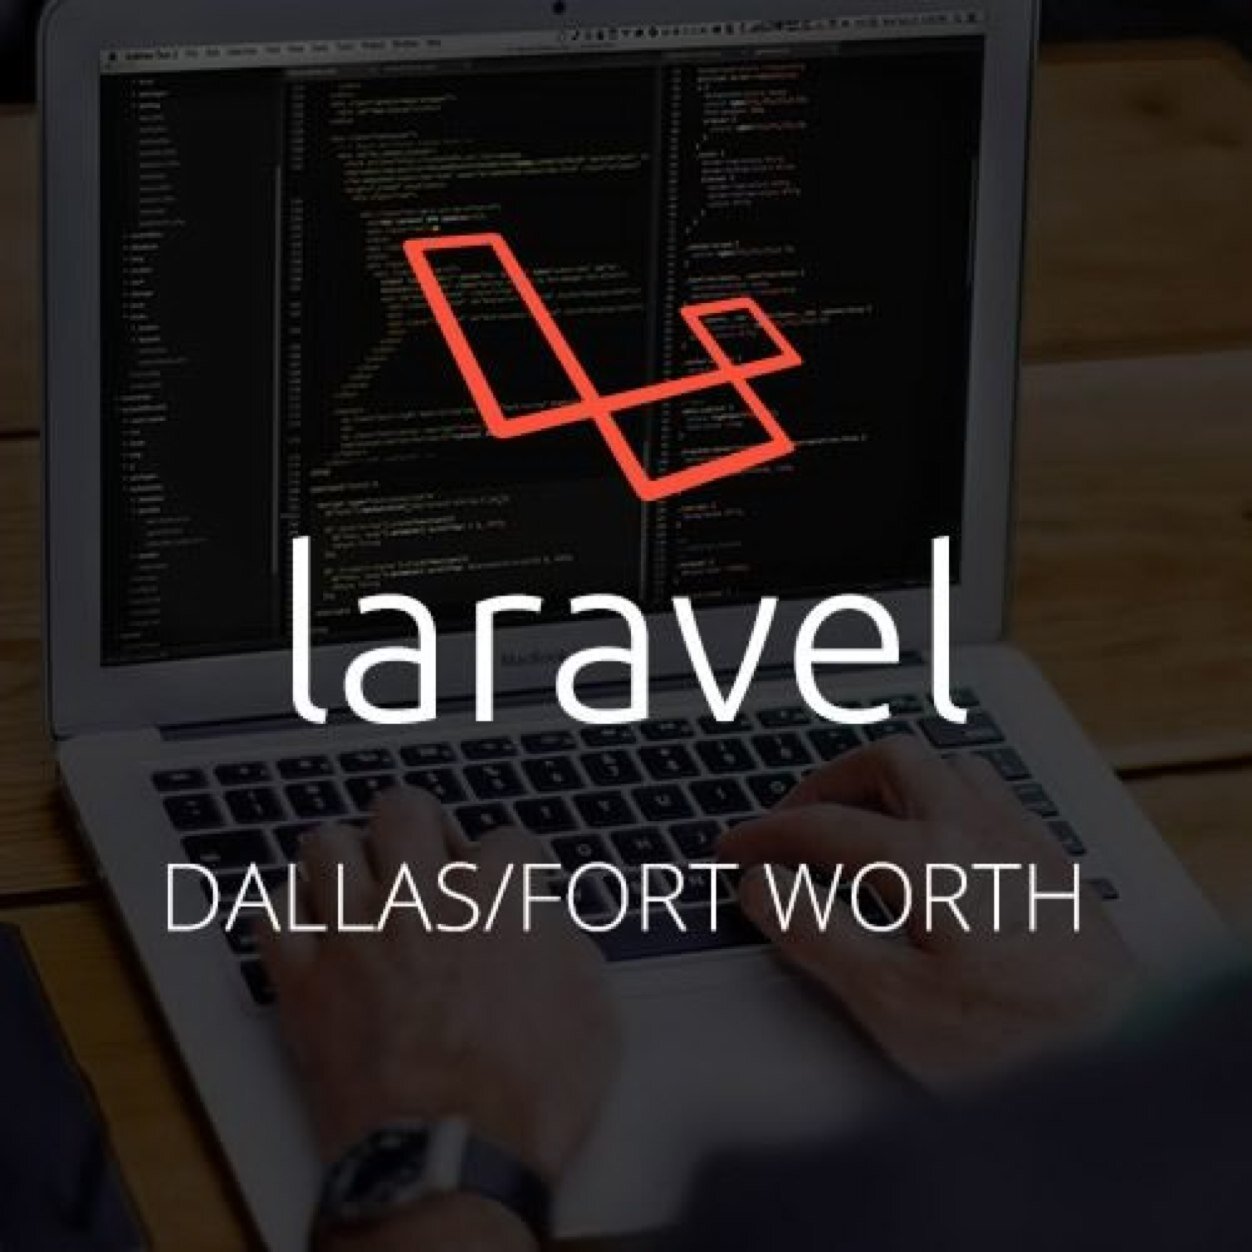 Laravel Dallas/Fort Worth is a group for people interested in learning and sharing about the Laravel framework, the PHP framework for web artisans.